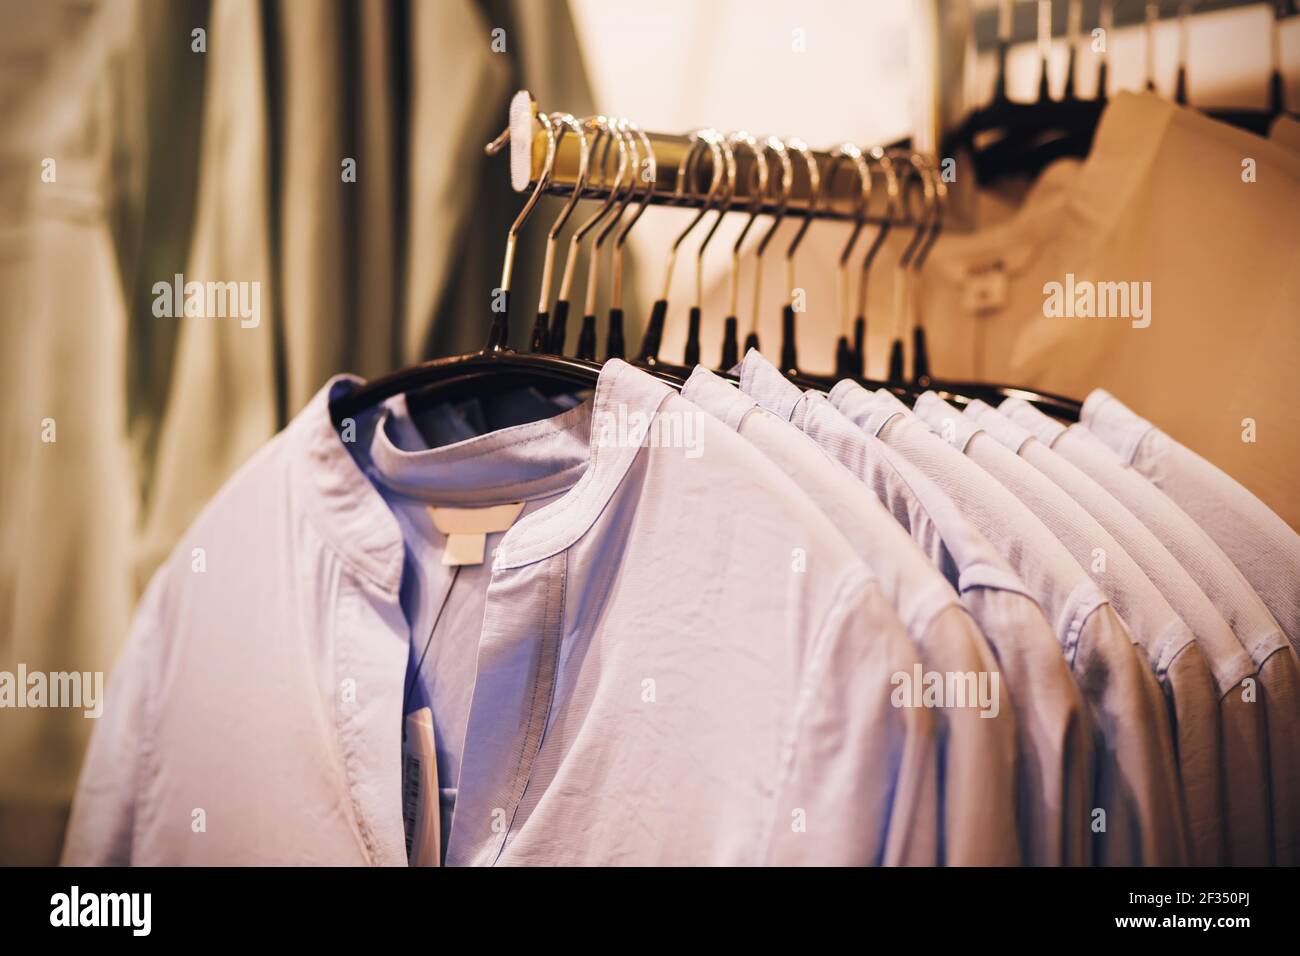 https://c8.alamy.com/comp/2F350PJ/blue-casual-shirts-in-different-sizes-hang-on-hangers-in-a-clothing-store-in-the-mall-shopping-and-sale-2F350PJ.jpg